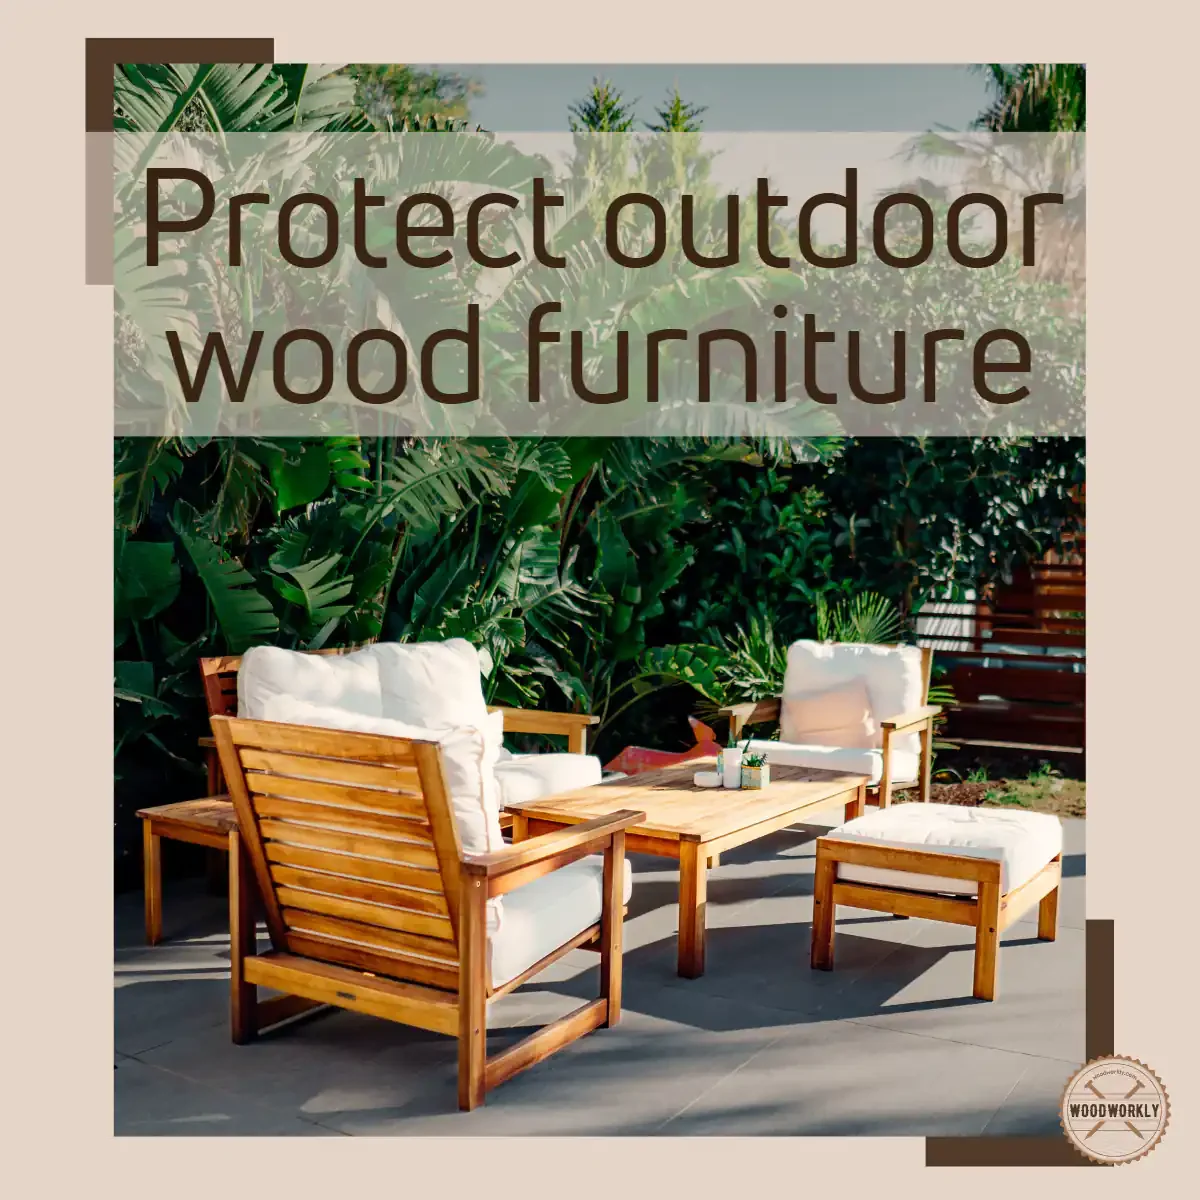 How to protect outdoor wood furniture from elements